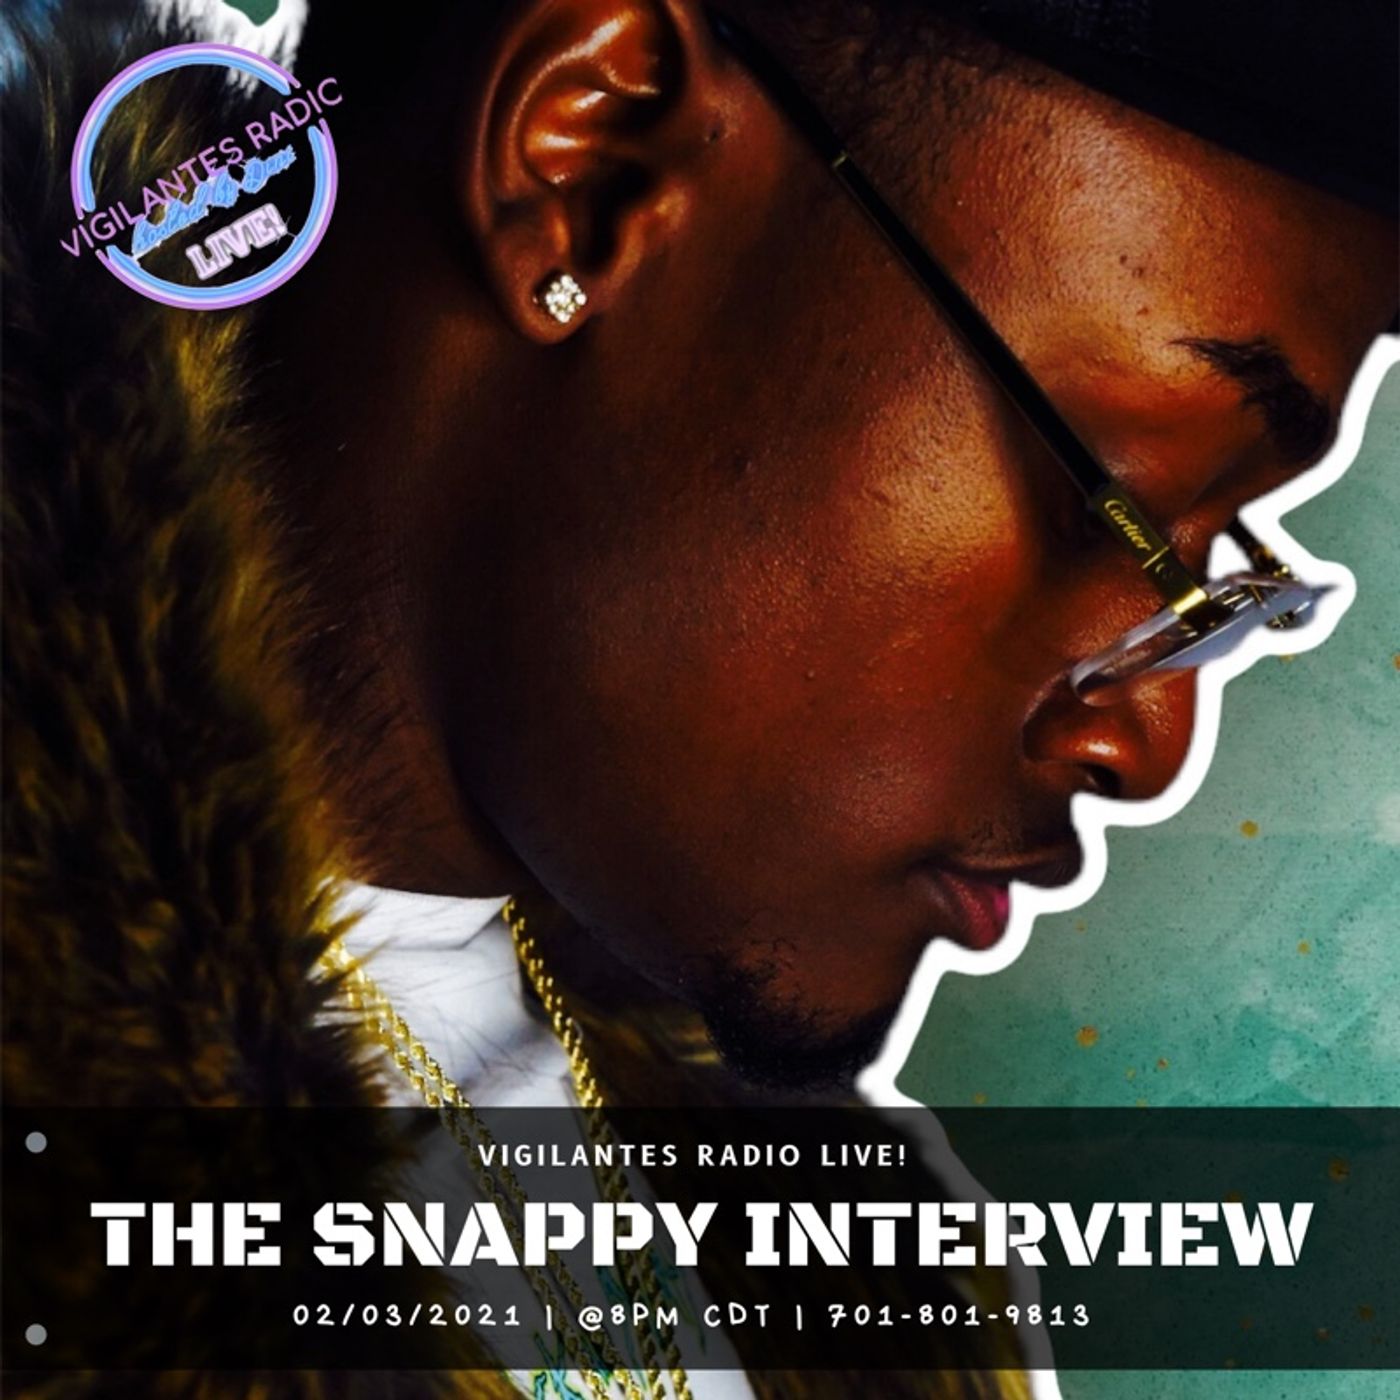 The Snappy Interview. Image